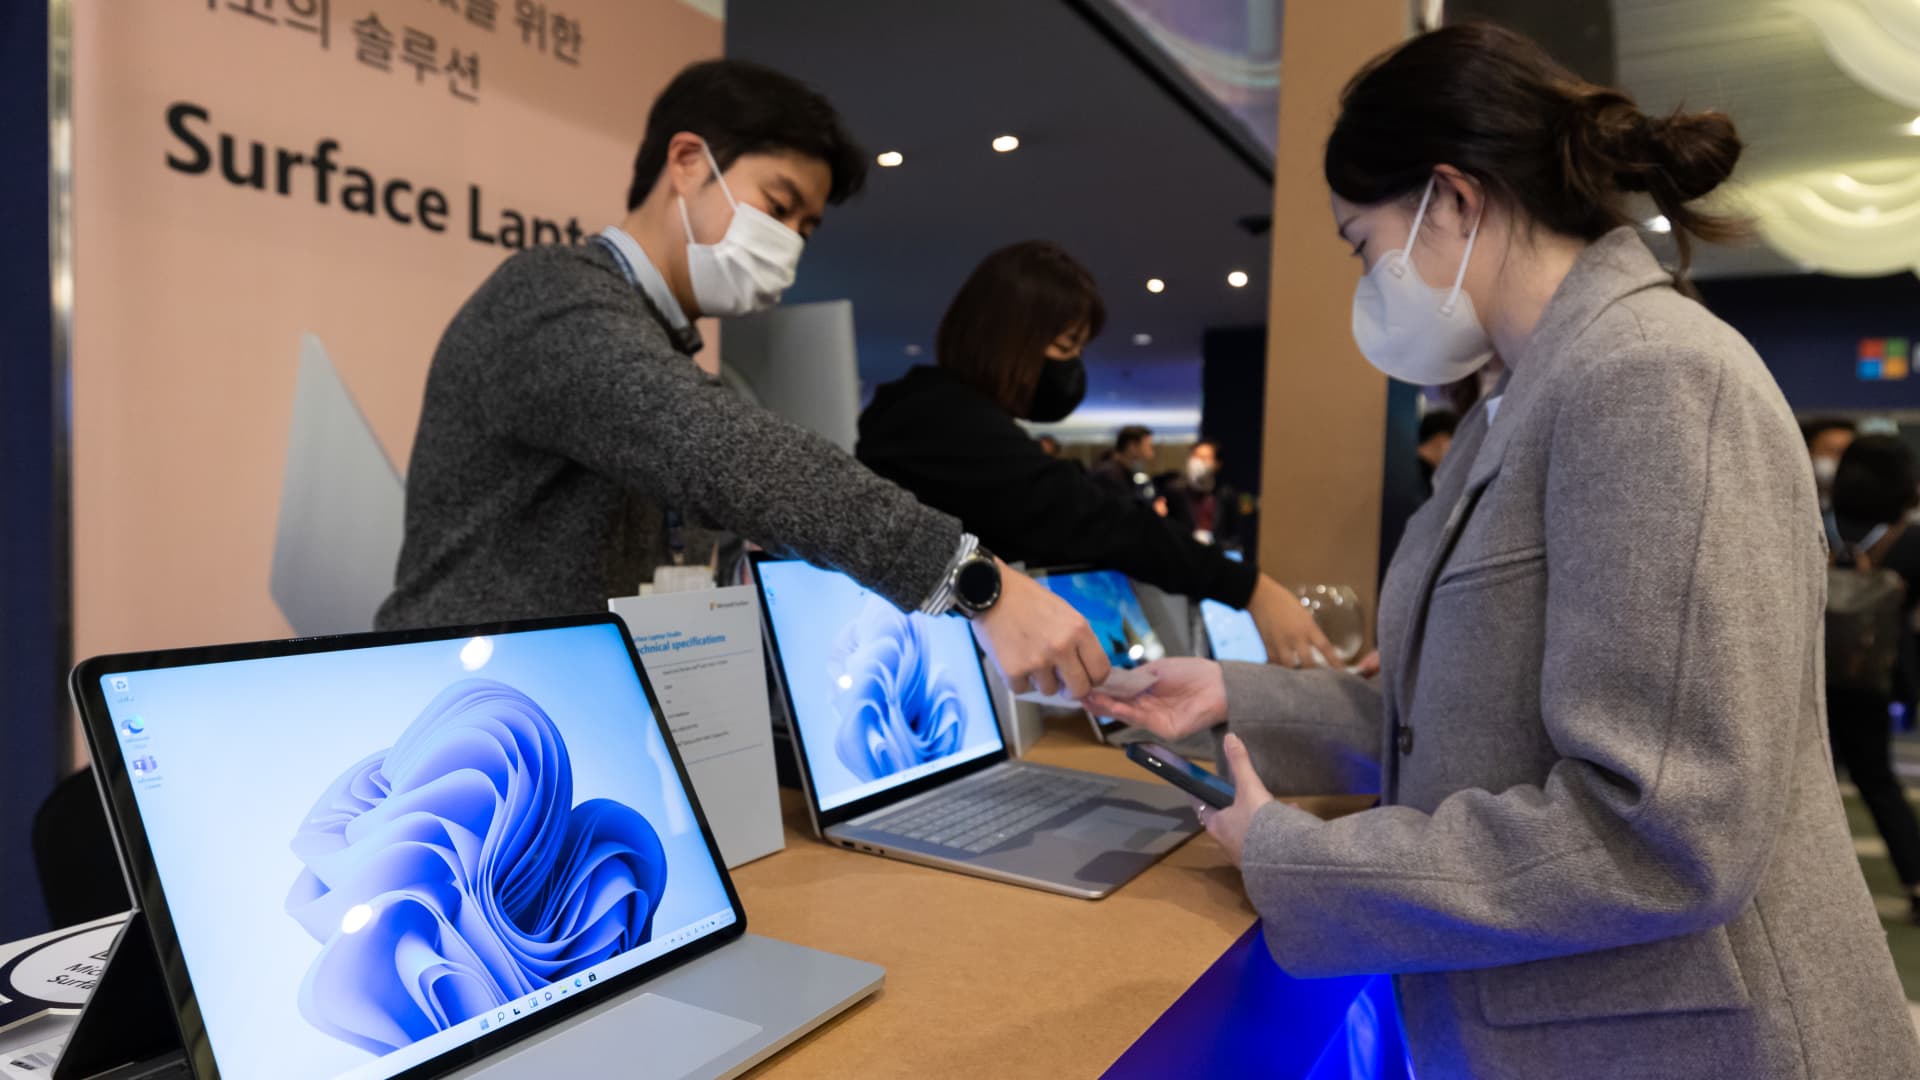 Microsoft Corp. surface 5 laptop computers on display at the company's Ignite Spotlight event in Seoul, South Korea, on Nov. 15, 2022. CEO Satya Nadella gave a keynote speech at an event hosted by the company's Korean unit.